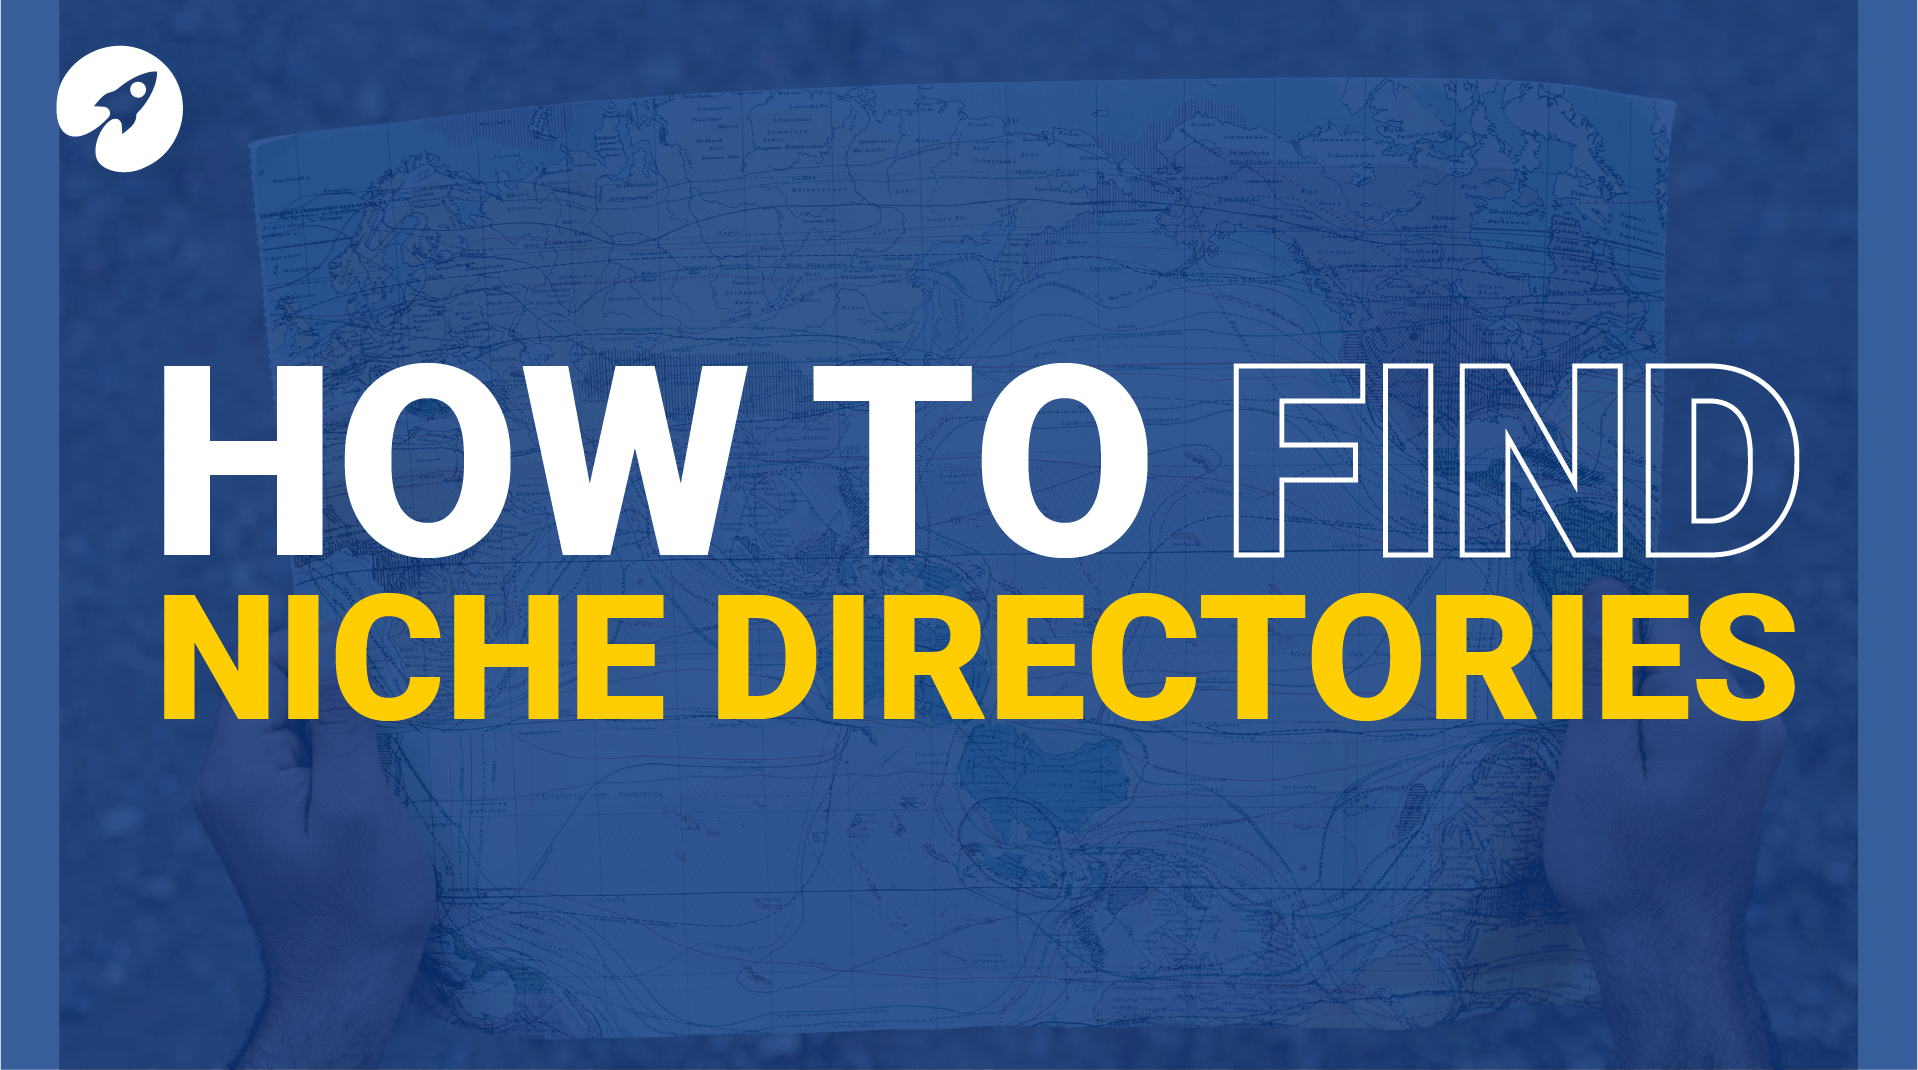 How to find niche directories for local businesses